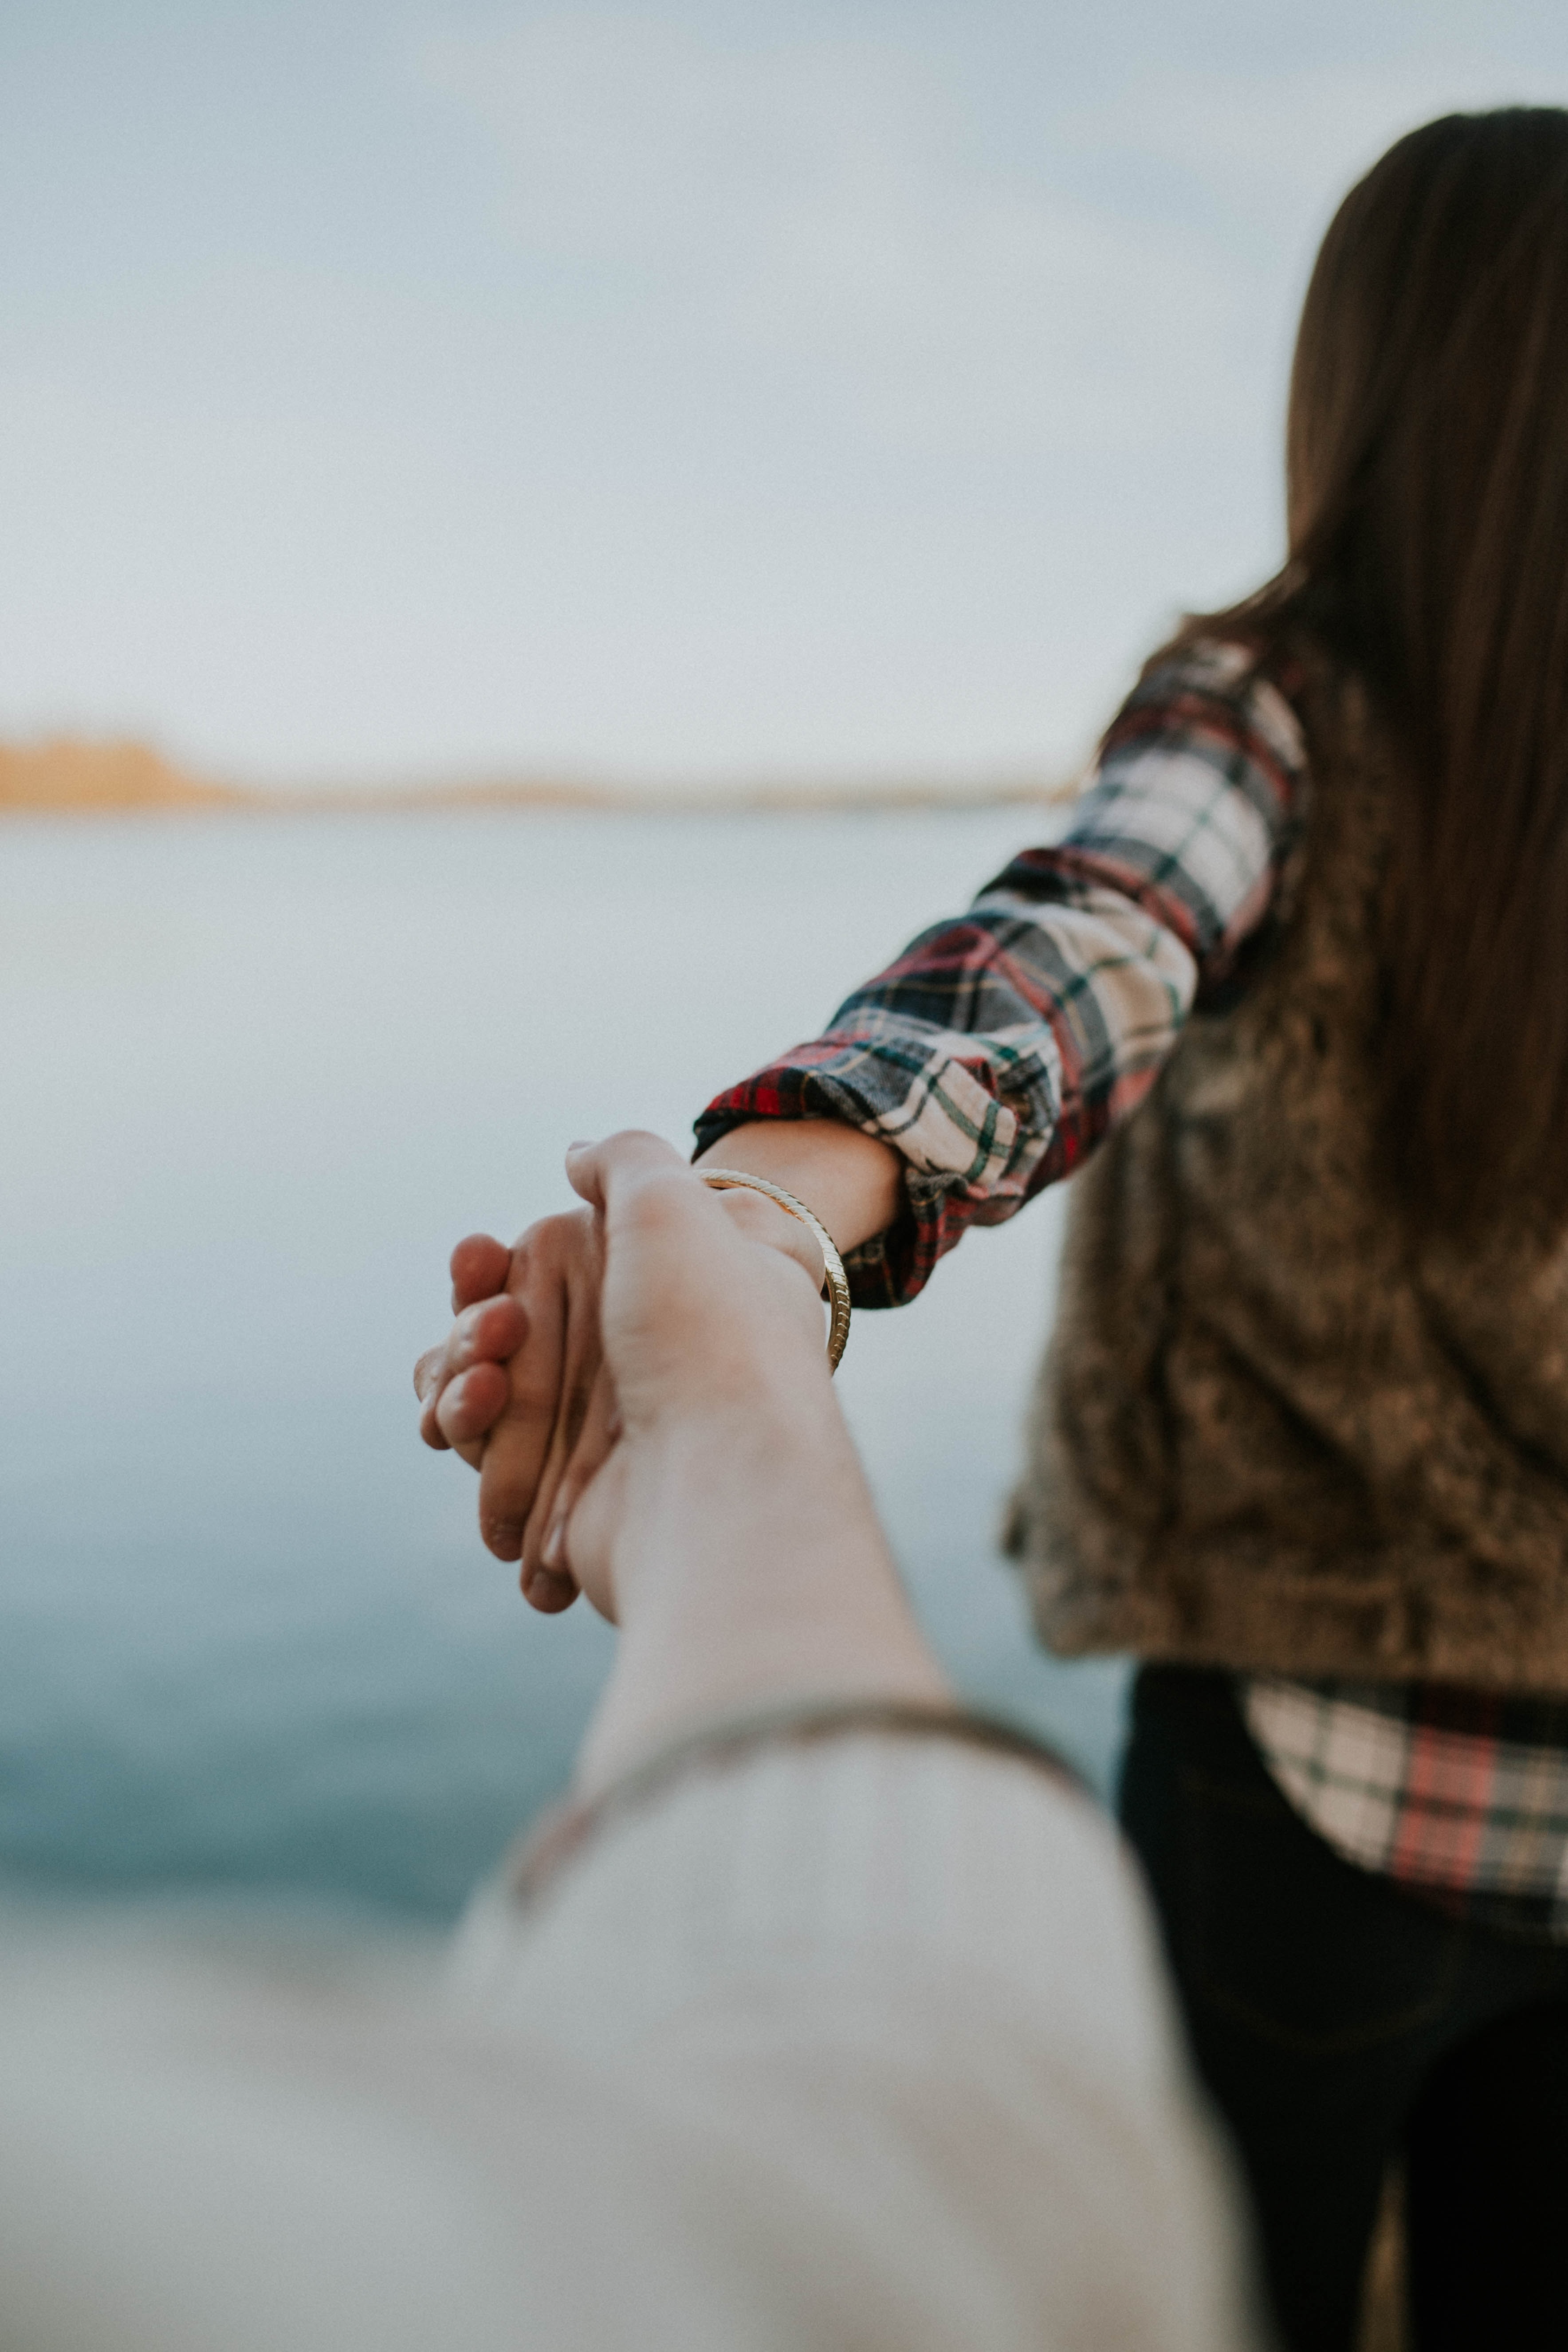 A woman leading her boyfriend by the hand | Source: Unsplash